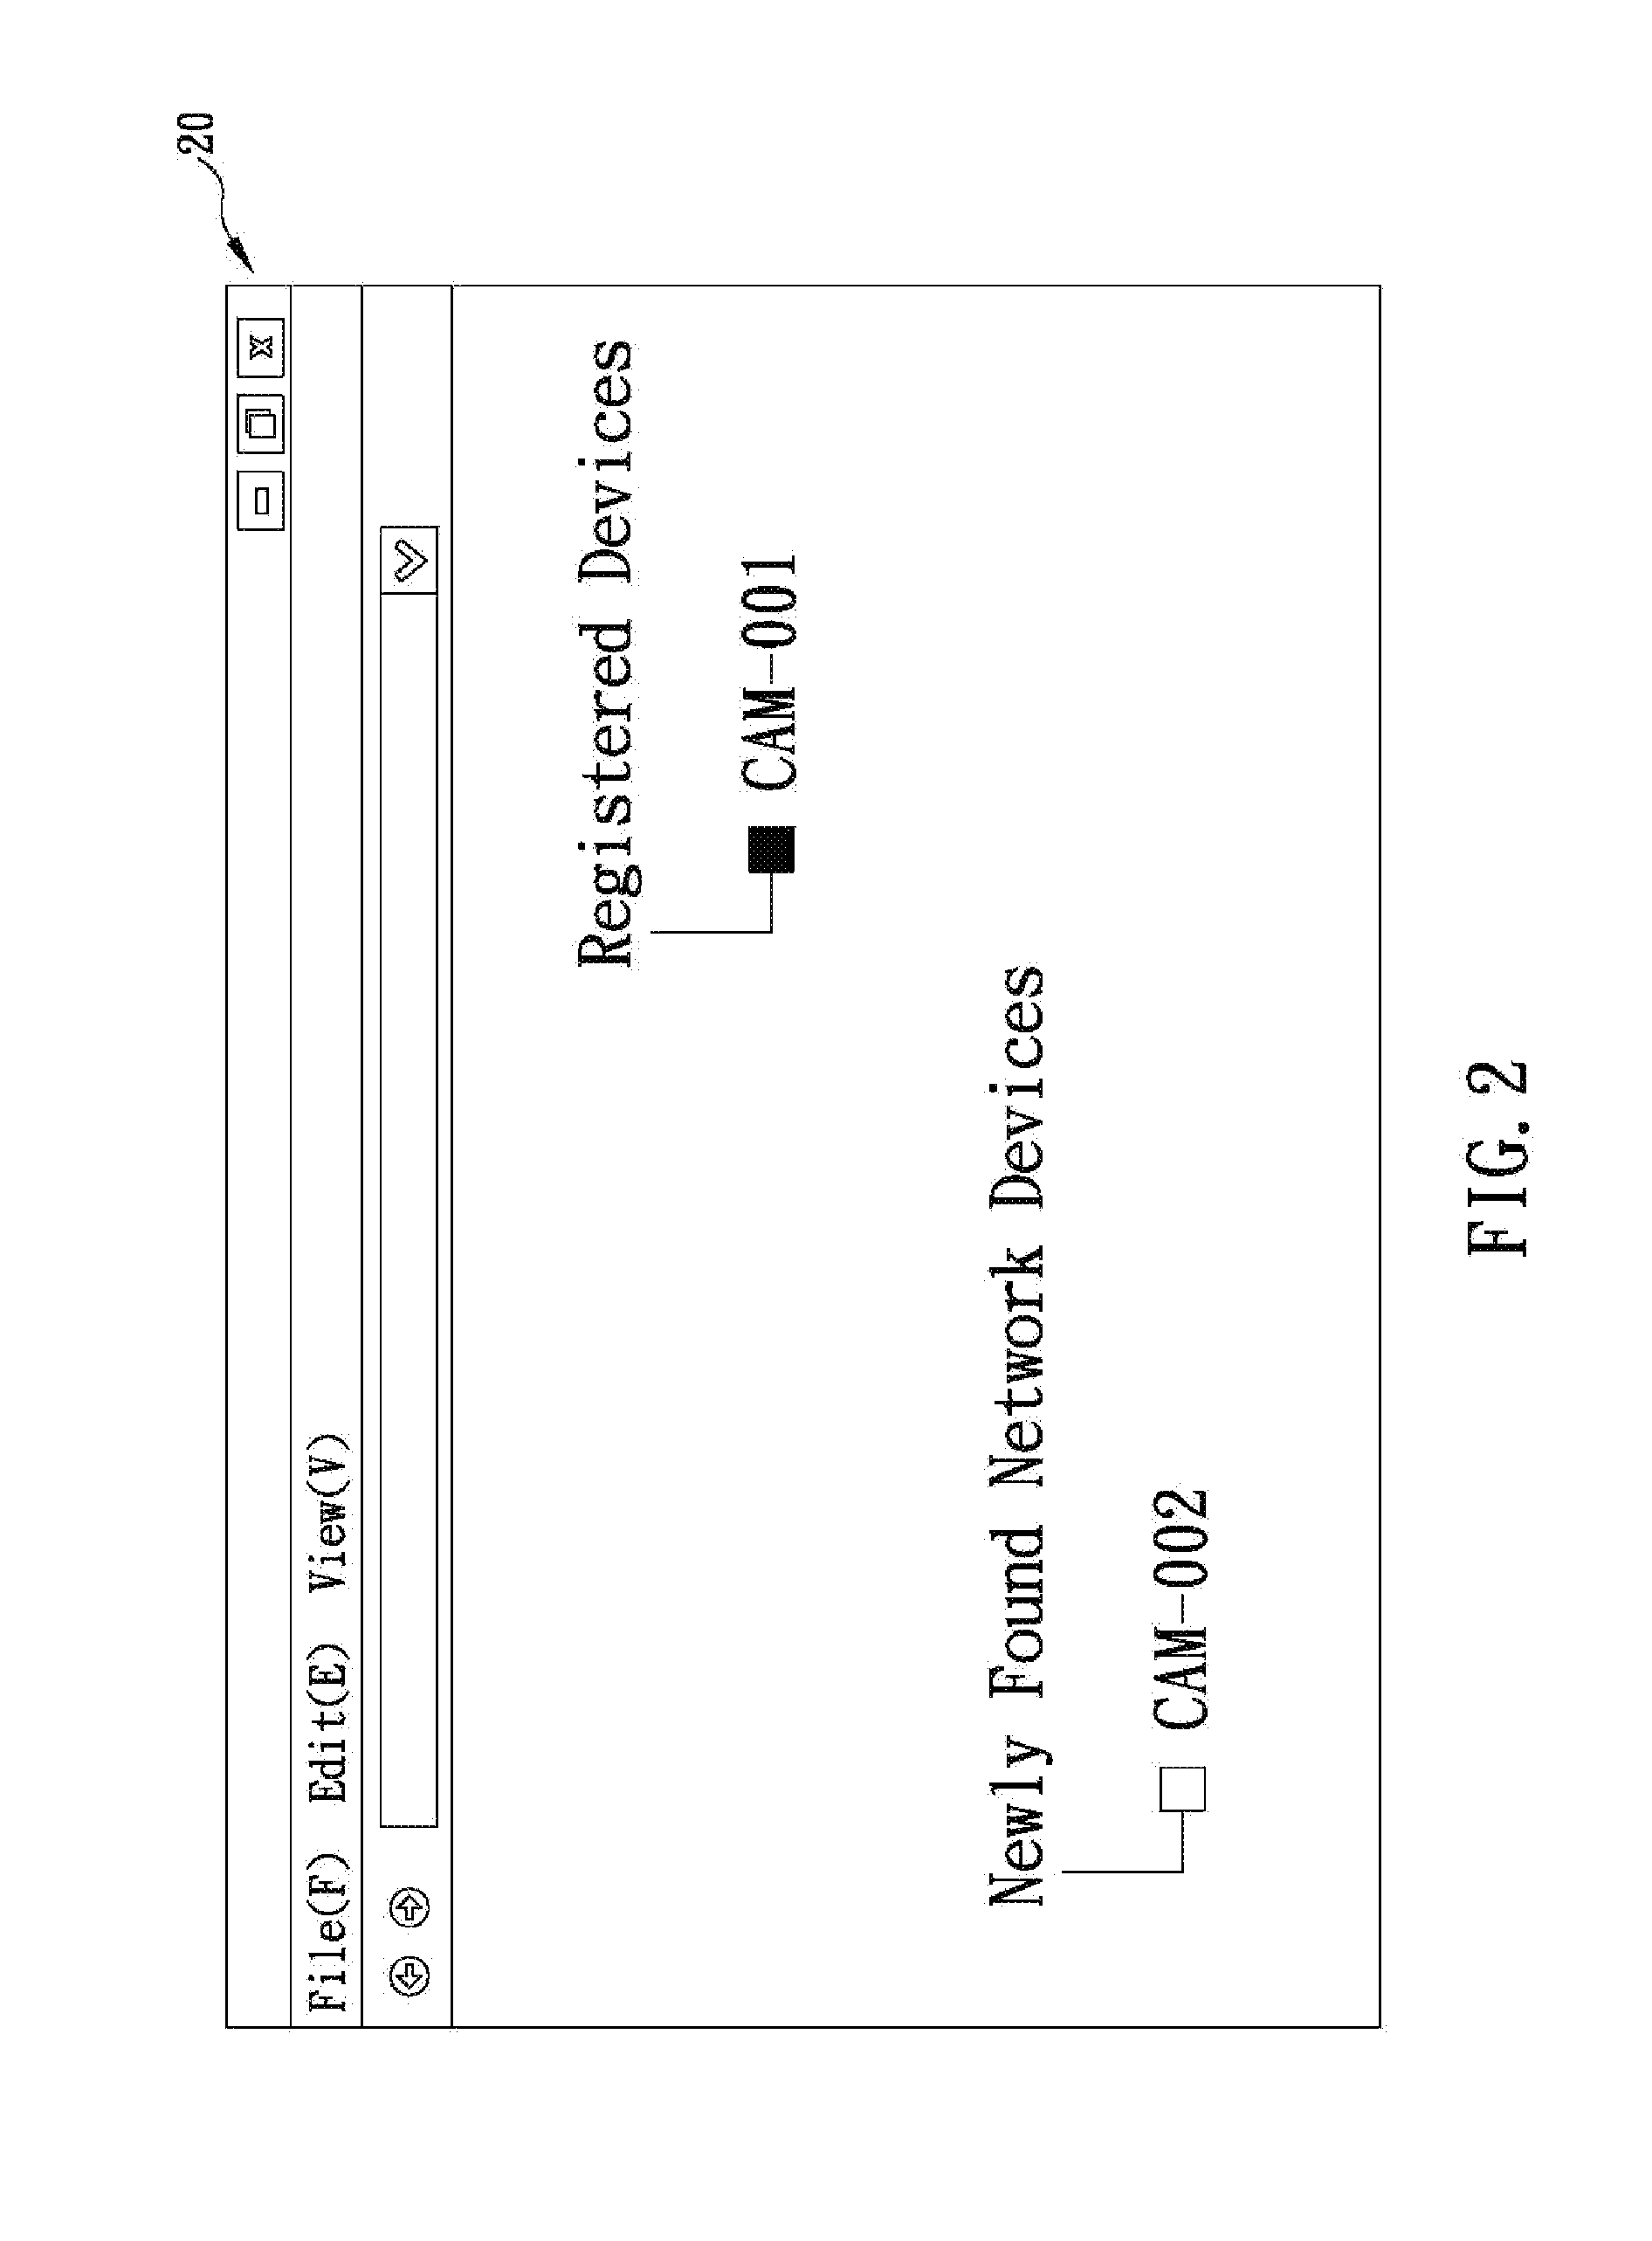 Zero-configuration system and method for network devices